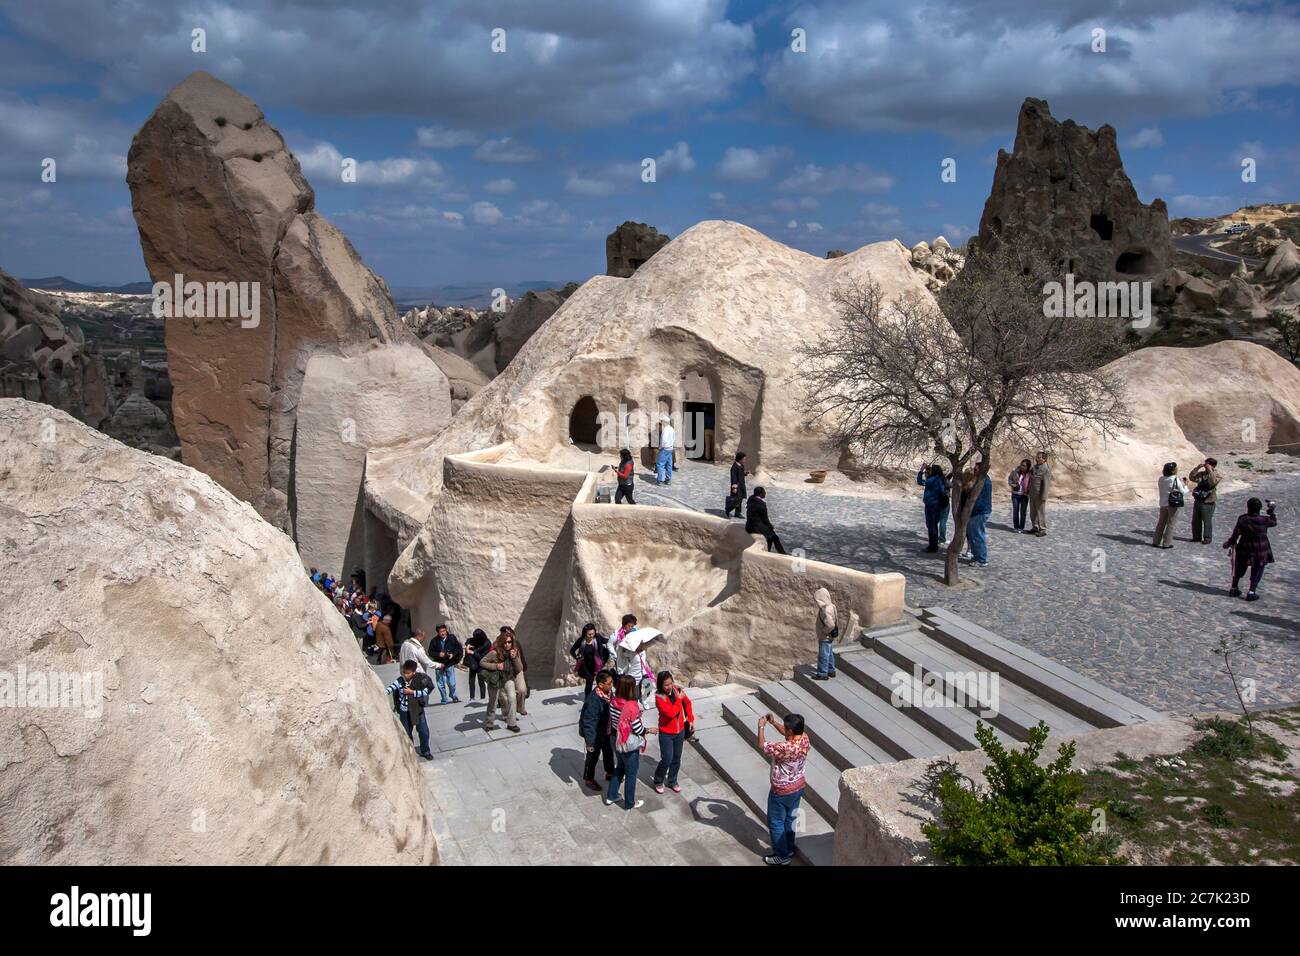 Visitors to the Open Air Museum near Goreme in the Cappadocia region of Turkey file out of the Chapel of St Basil containing the fresco of Jesus. Stock Photo